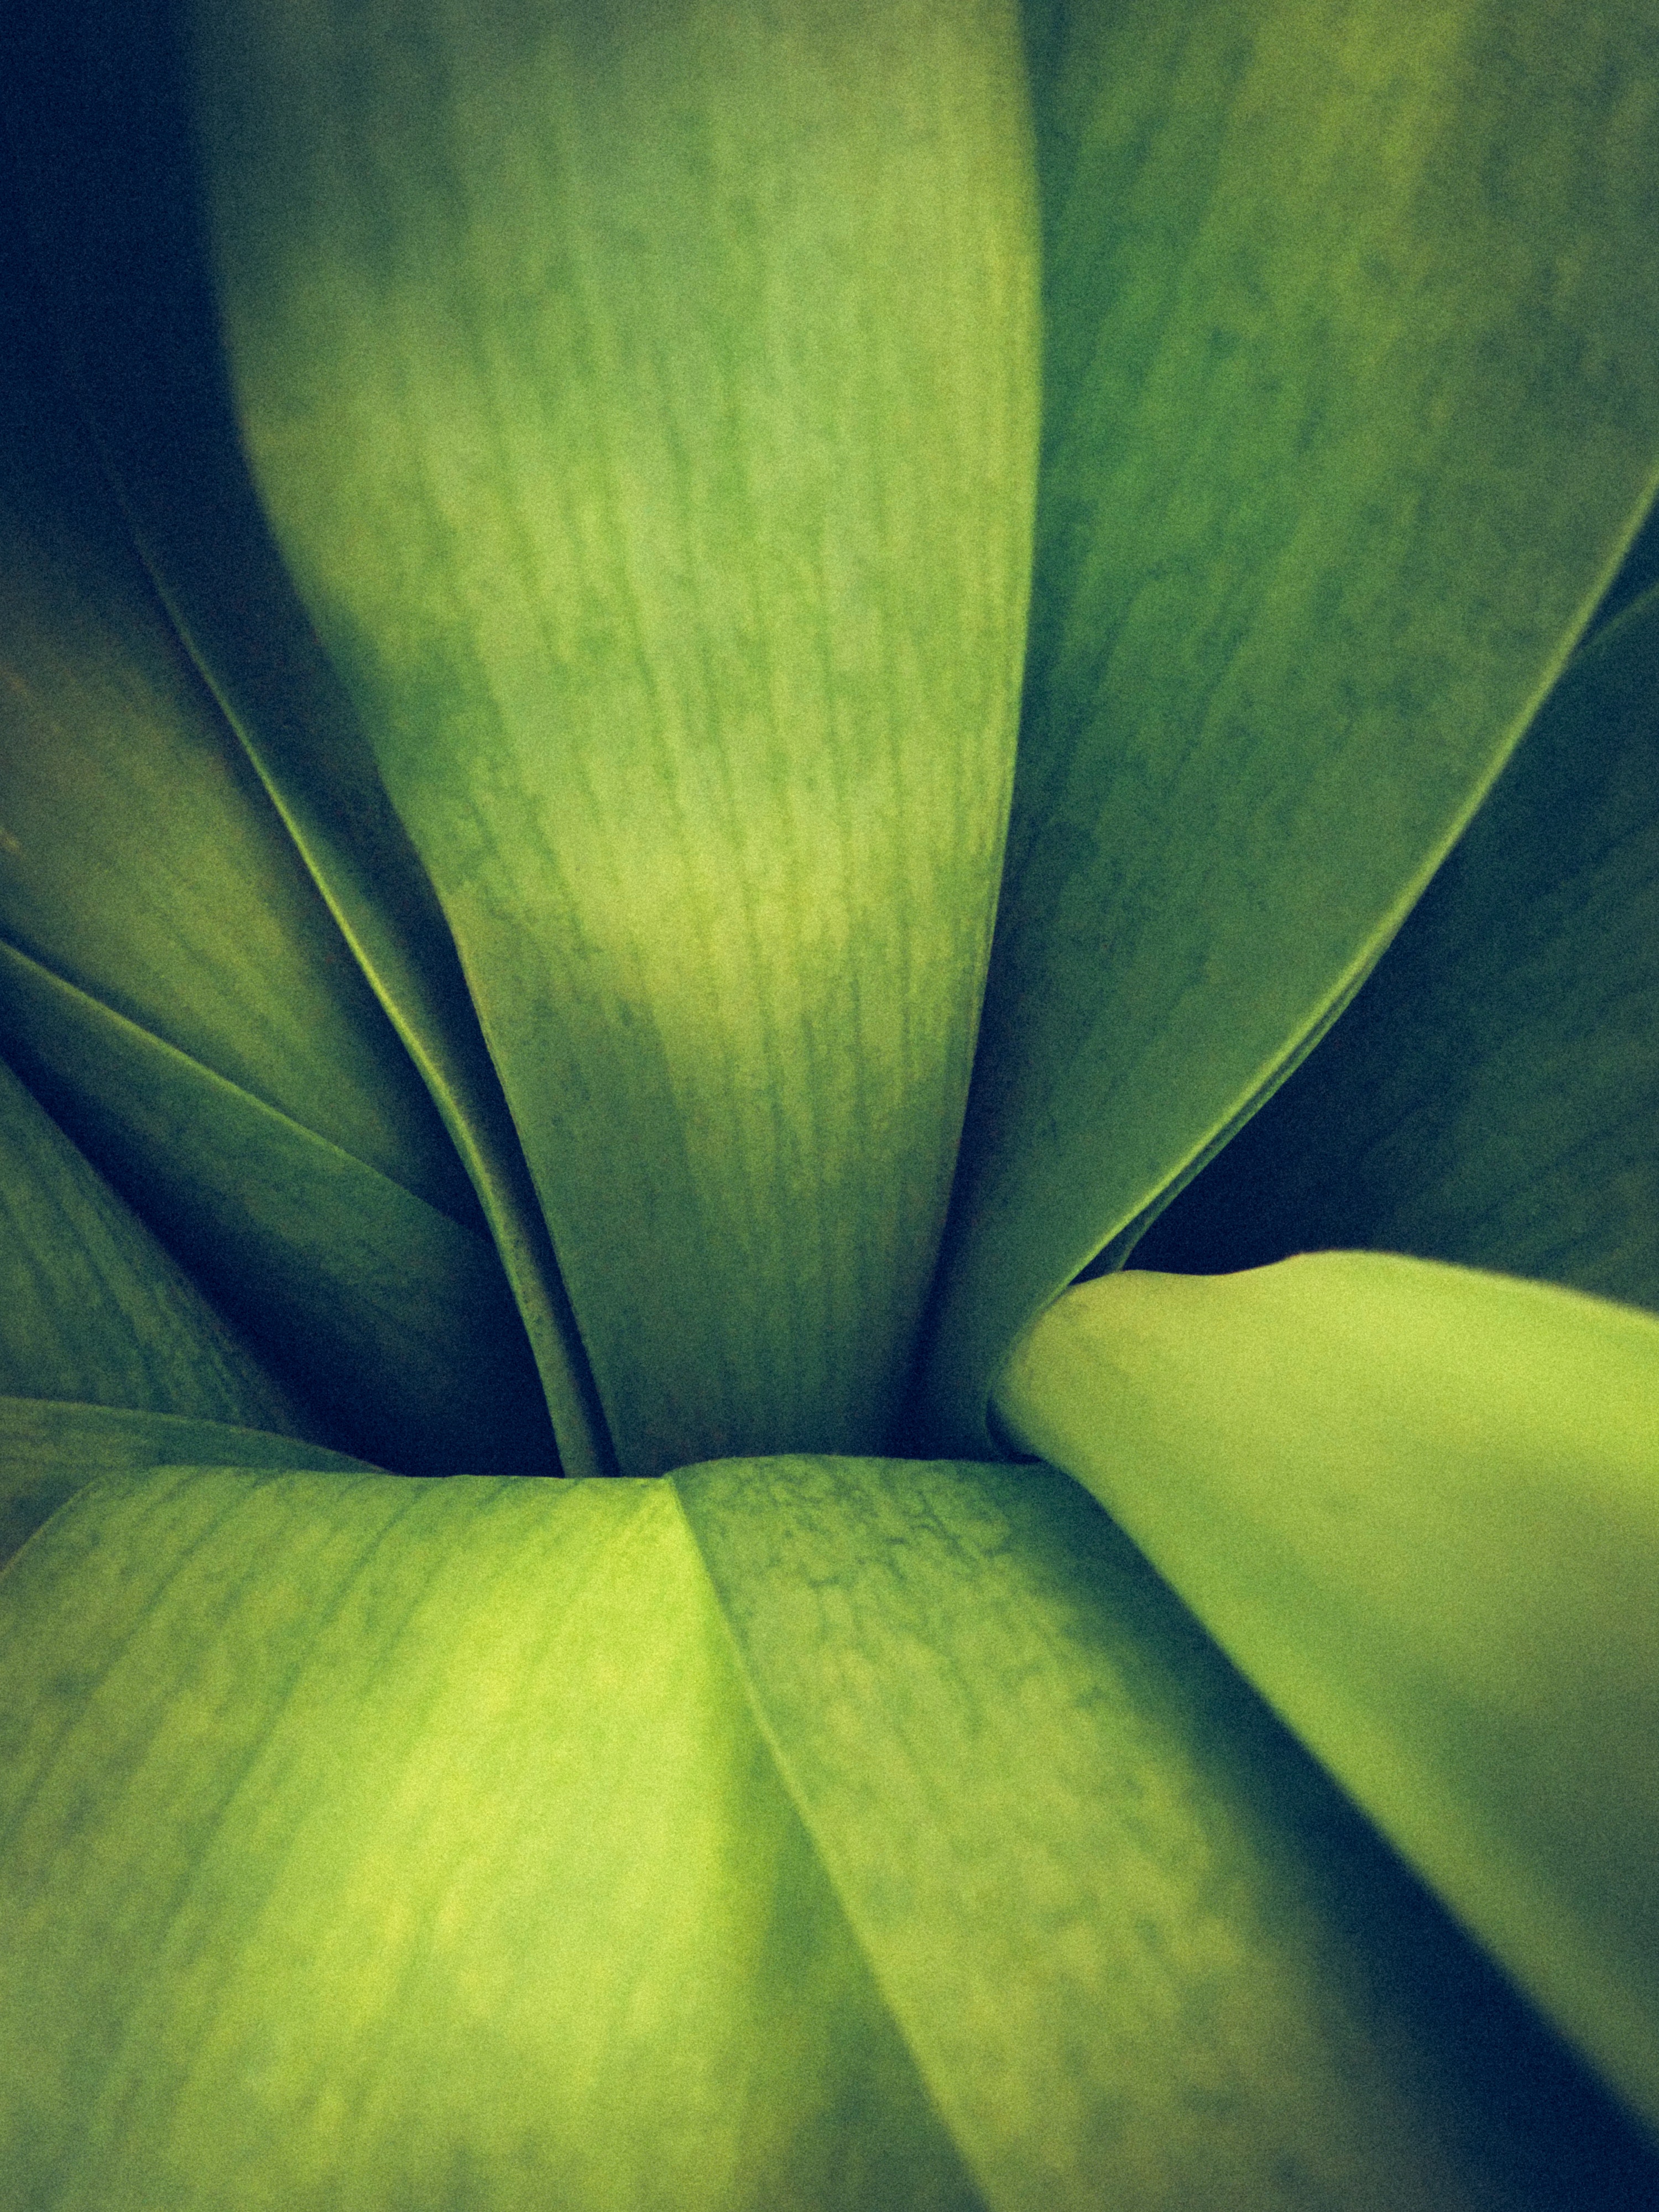 Close-up photo of a green plant